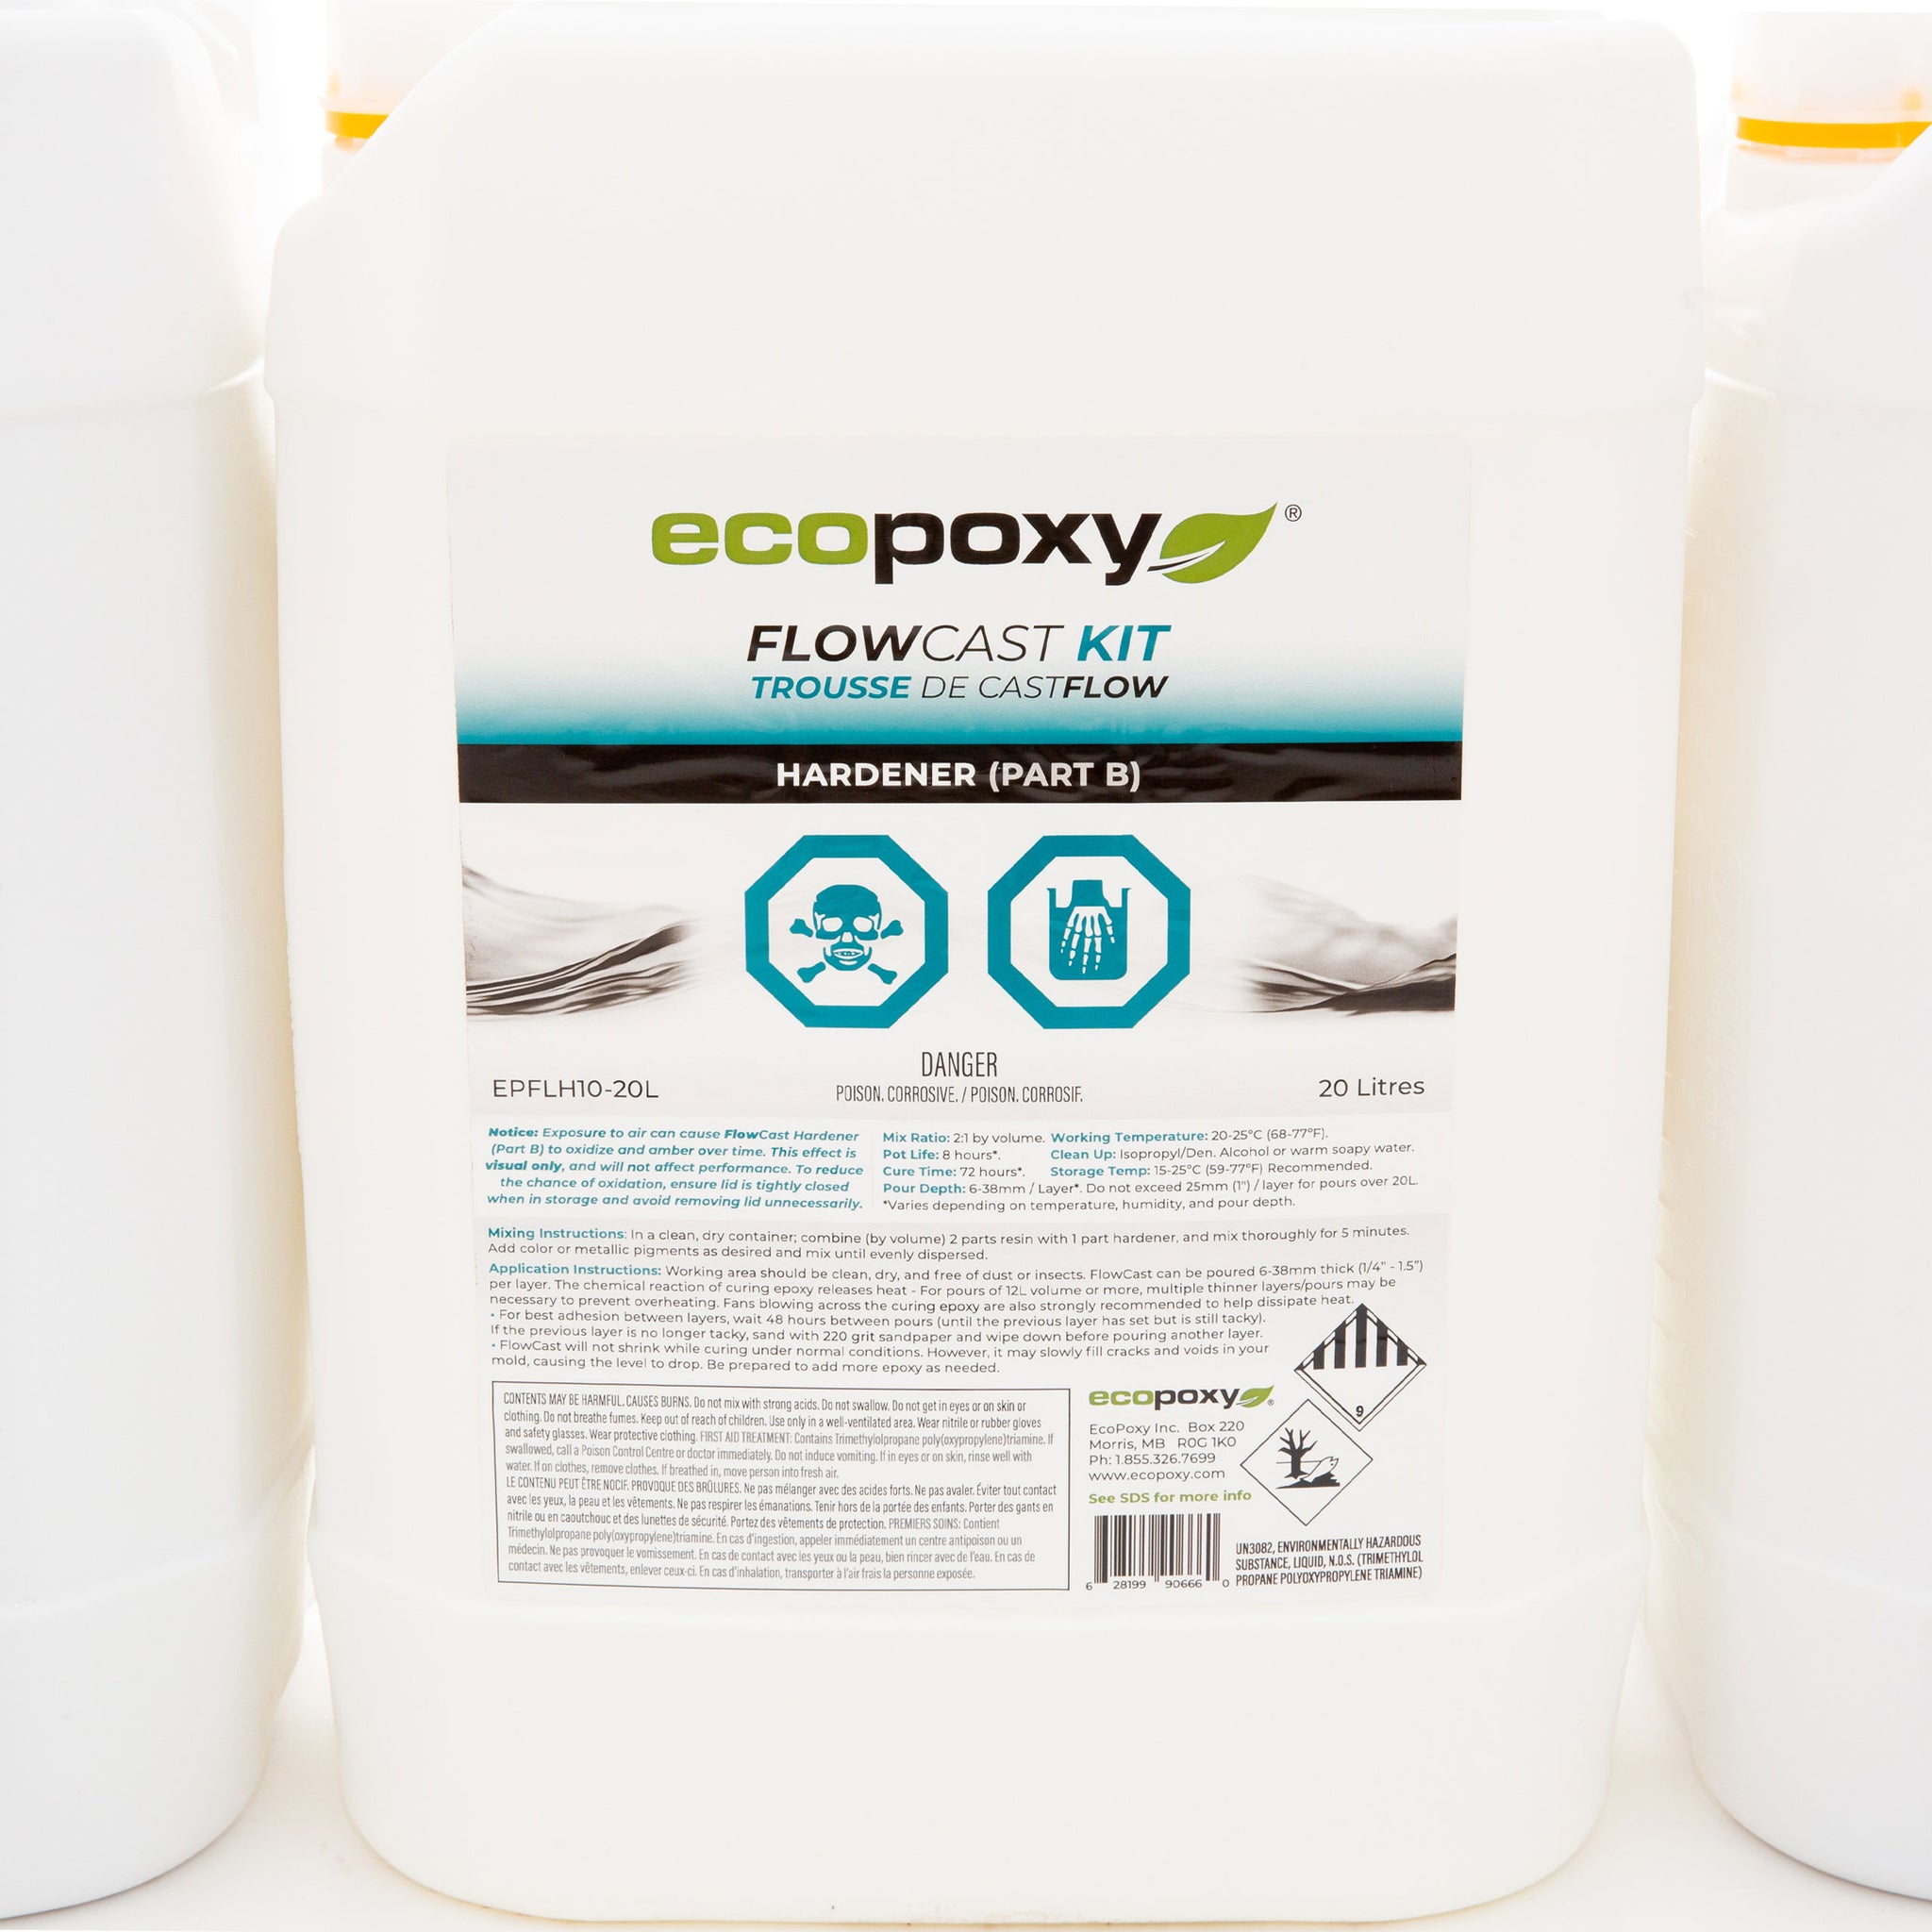 Casting Epoxy Resin  Water Clear FlowCast for Thick Pours — EcoPoxy USA  Inc.